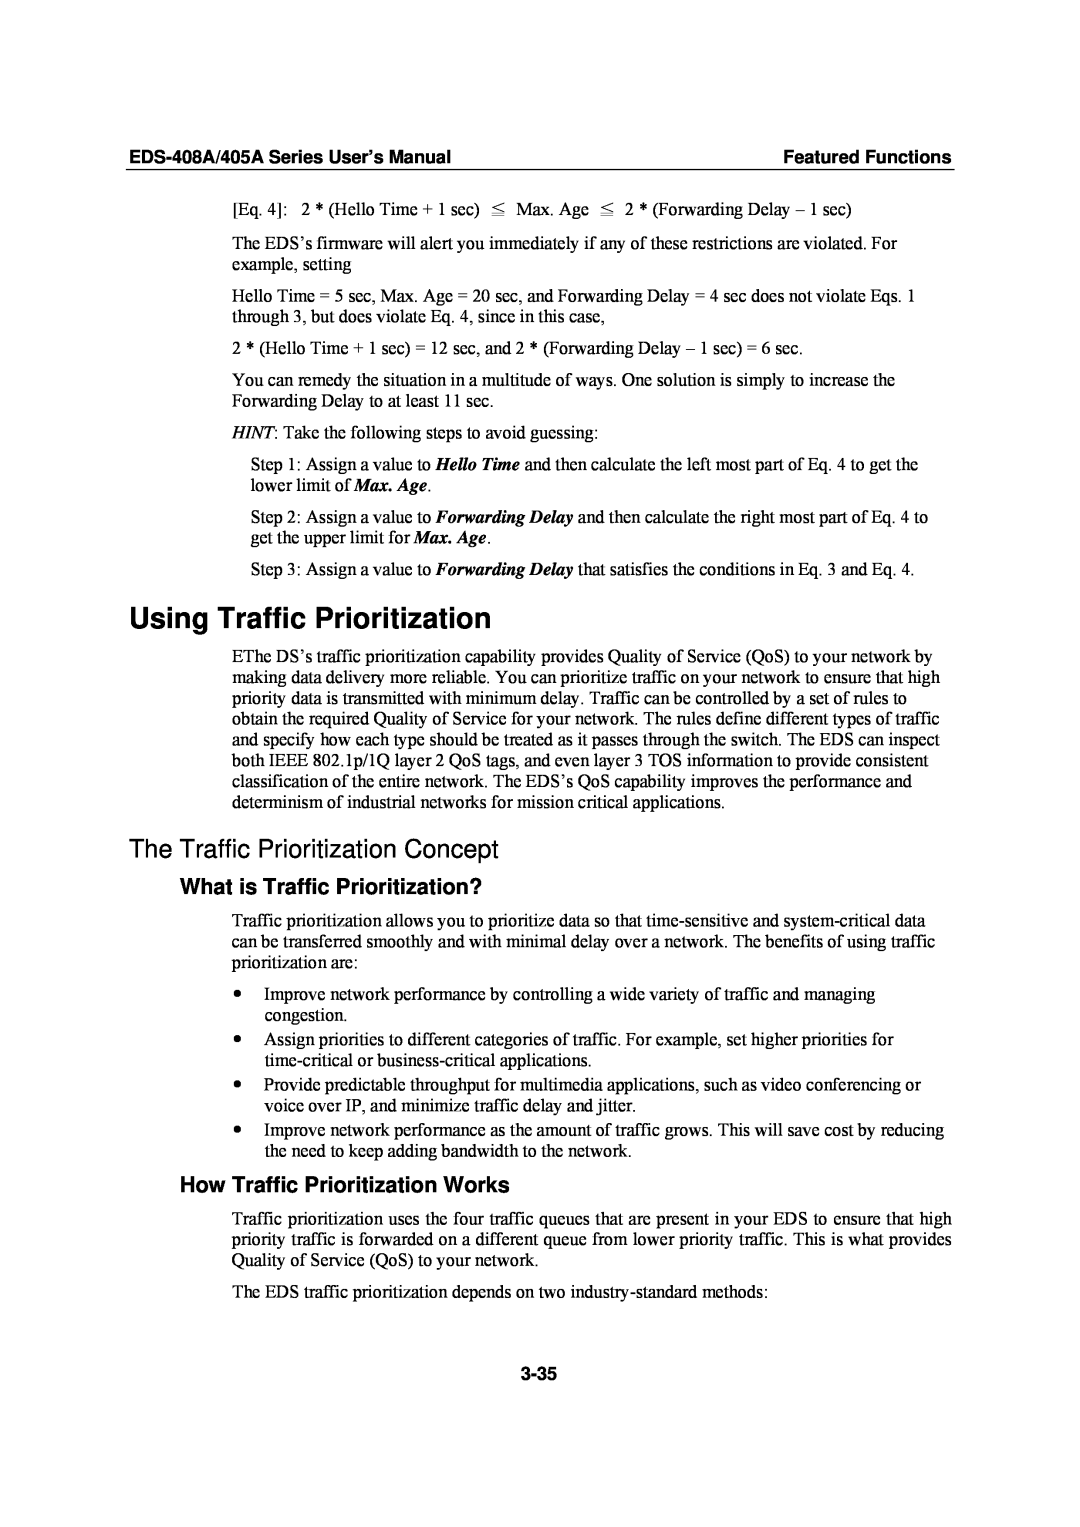 Moxa Technologies EDS-408A, EDS-405A user manual Using Traffic Prioritization, The Traffic Prioritization Concept, 3-35 